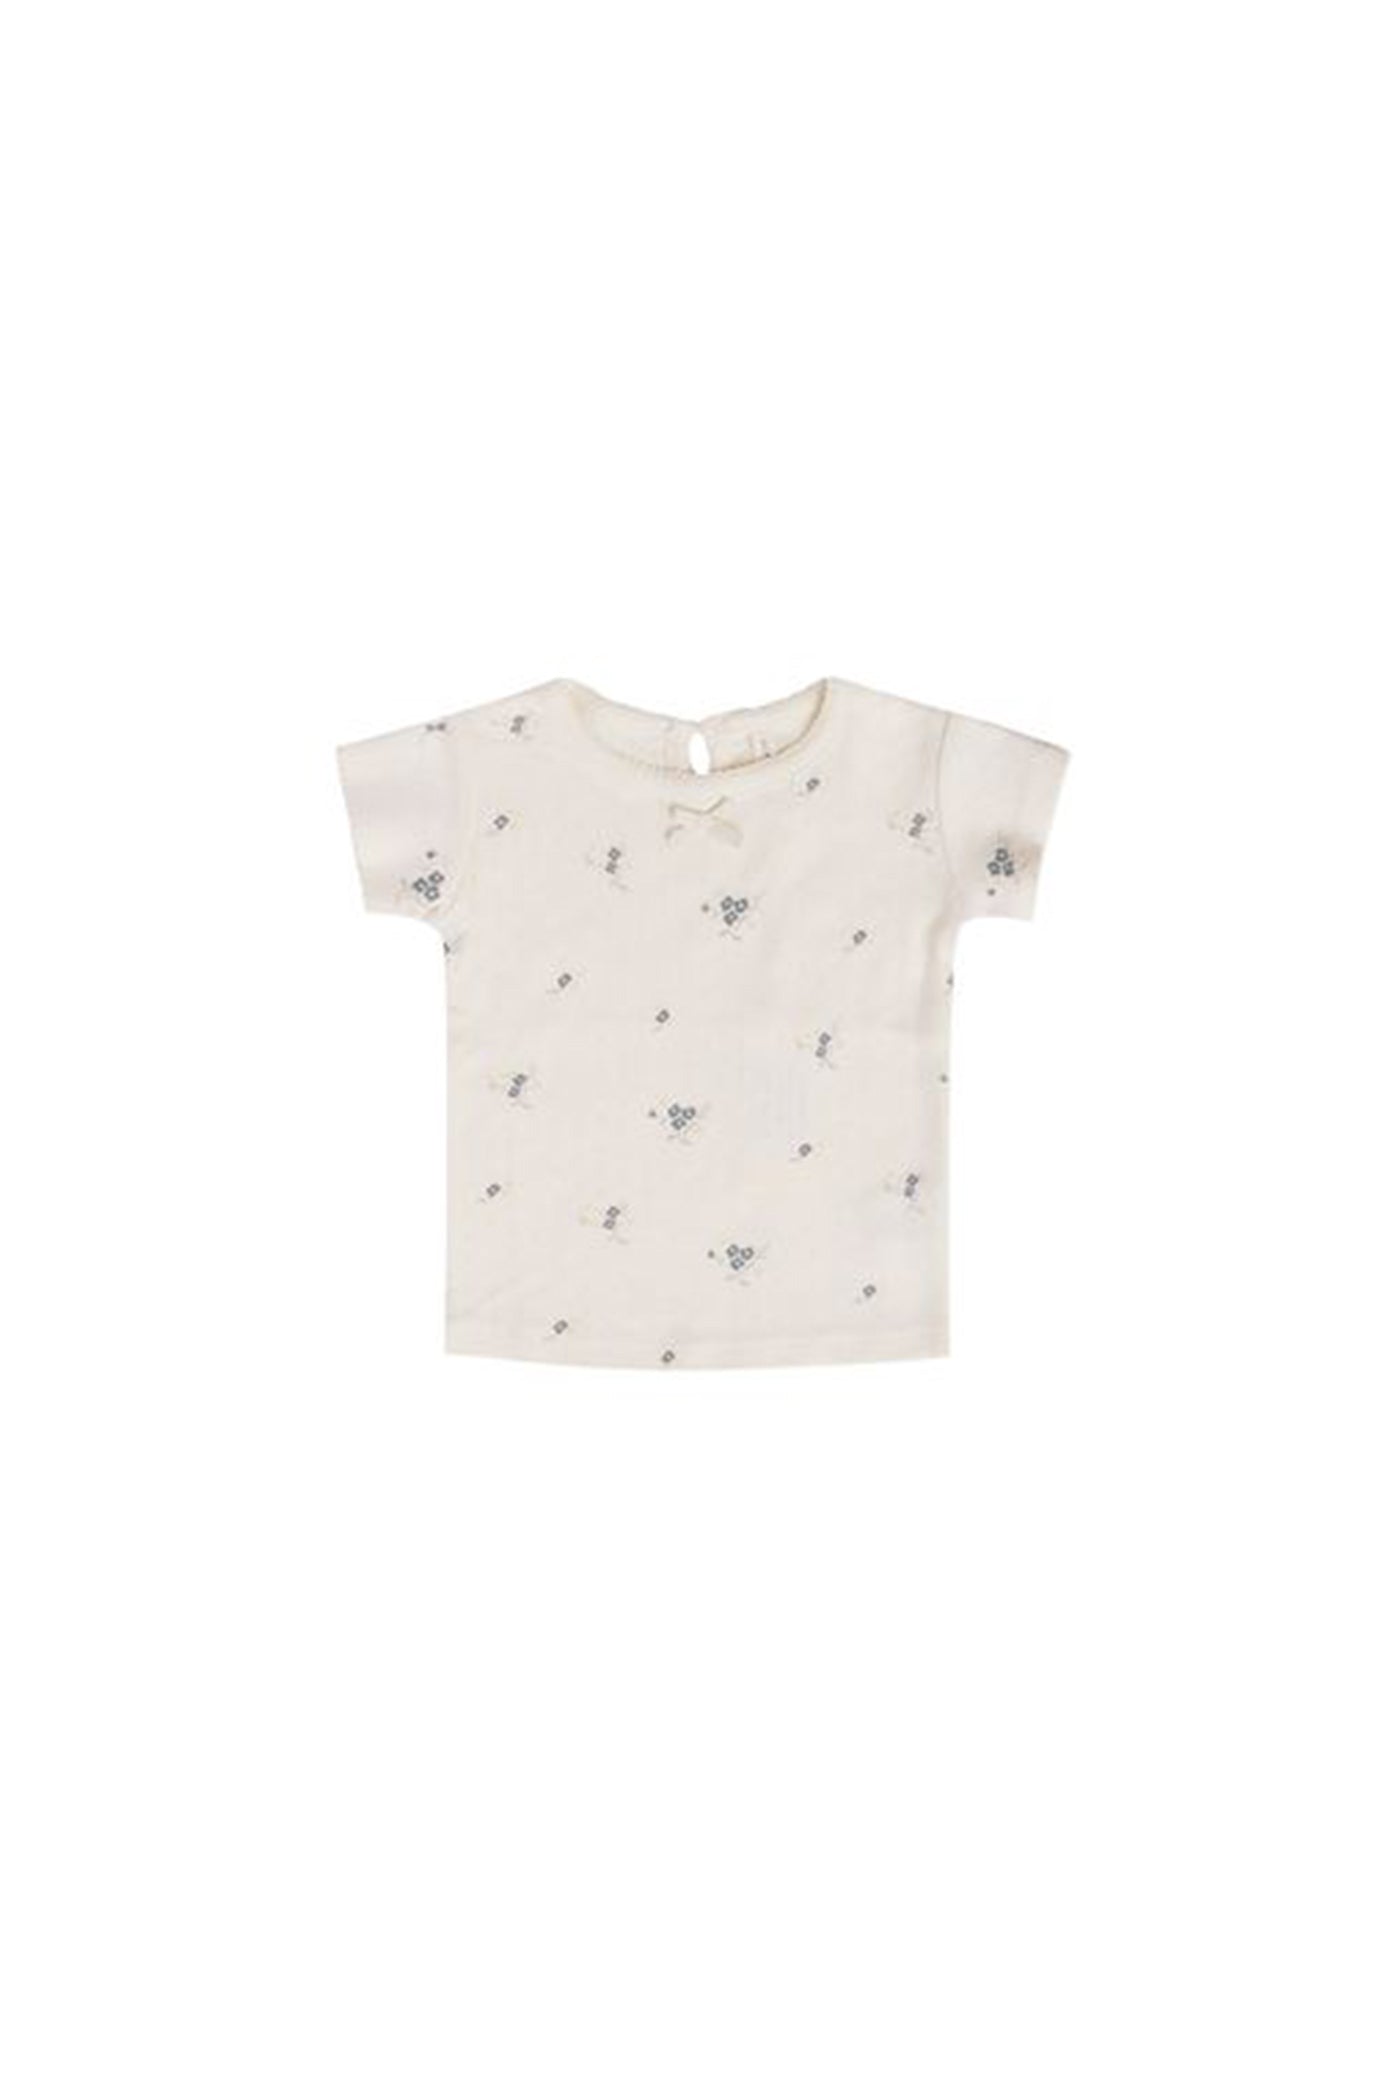 Pointelle Kids Tee by Quincy Mae